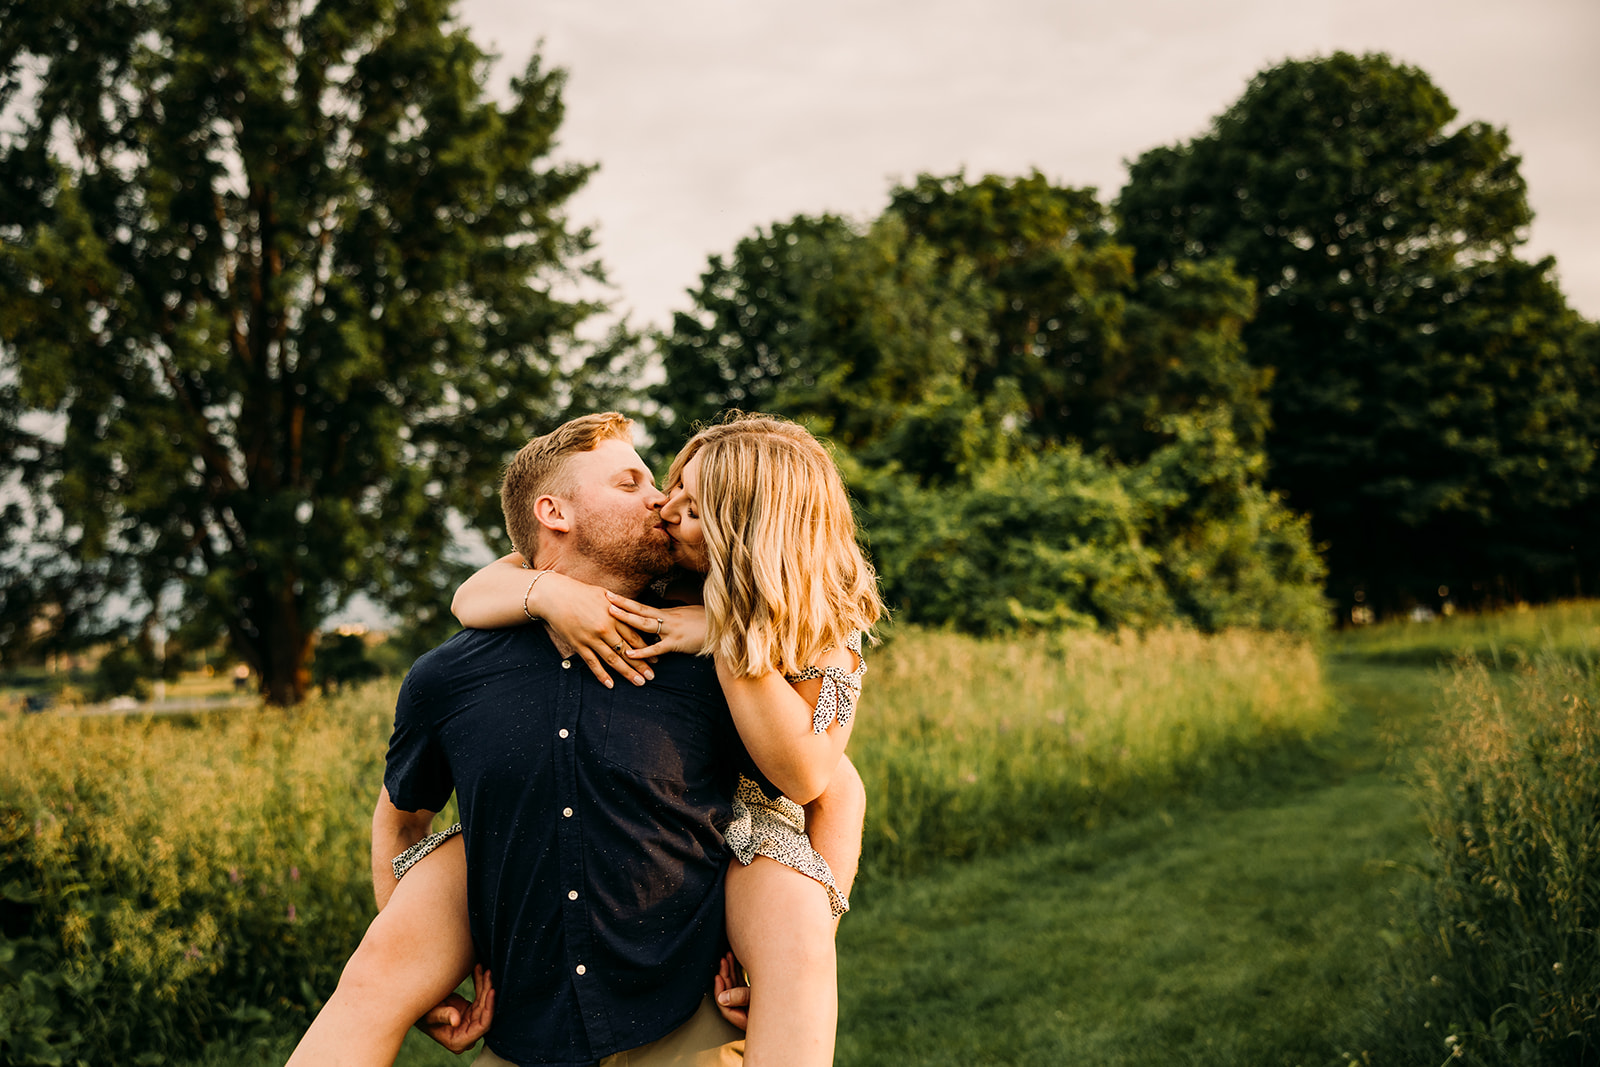 Sunset engagement photoshoot in a dreamy field